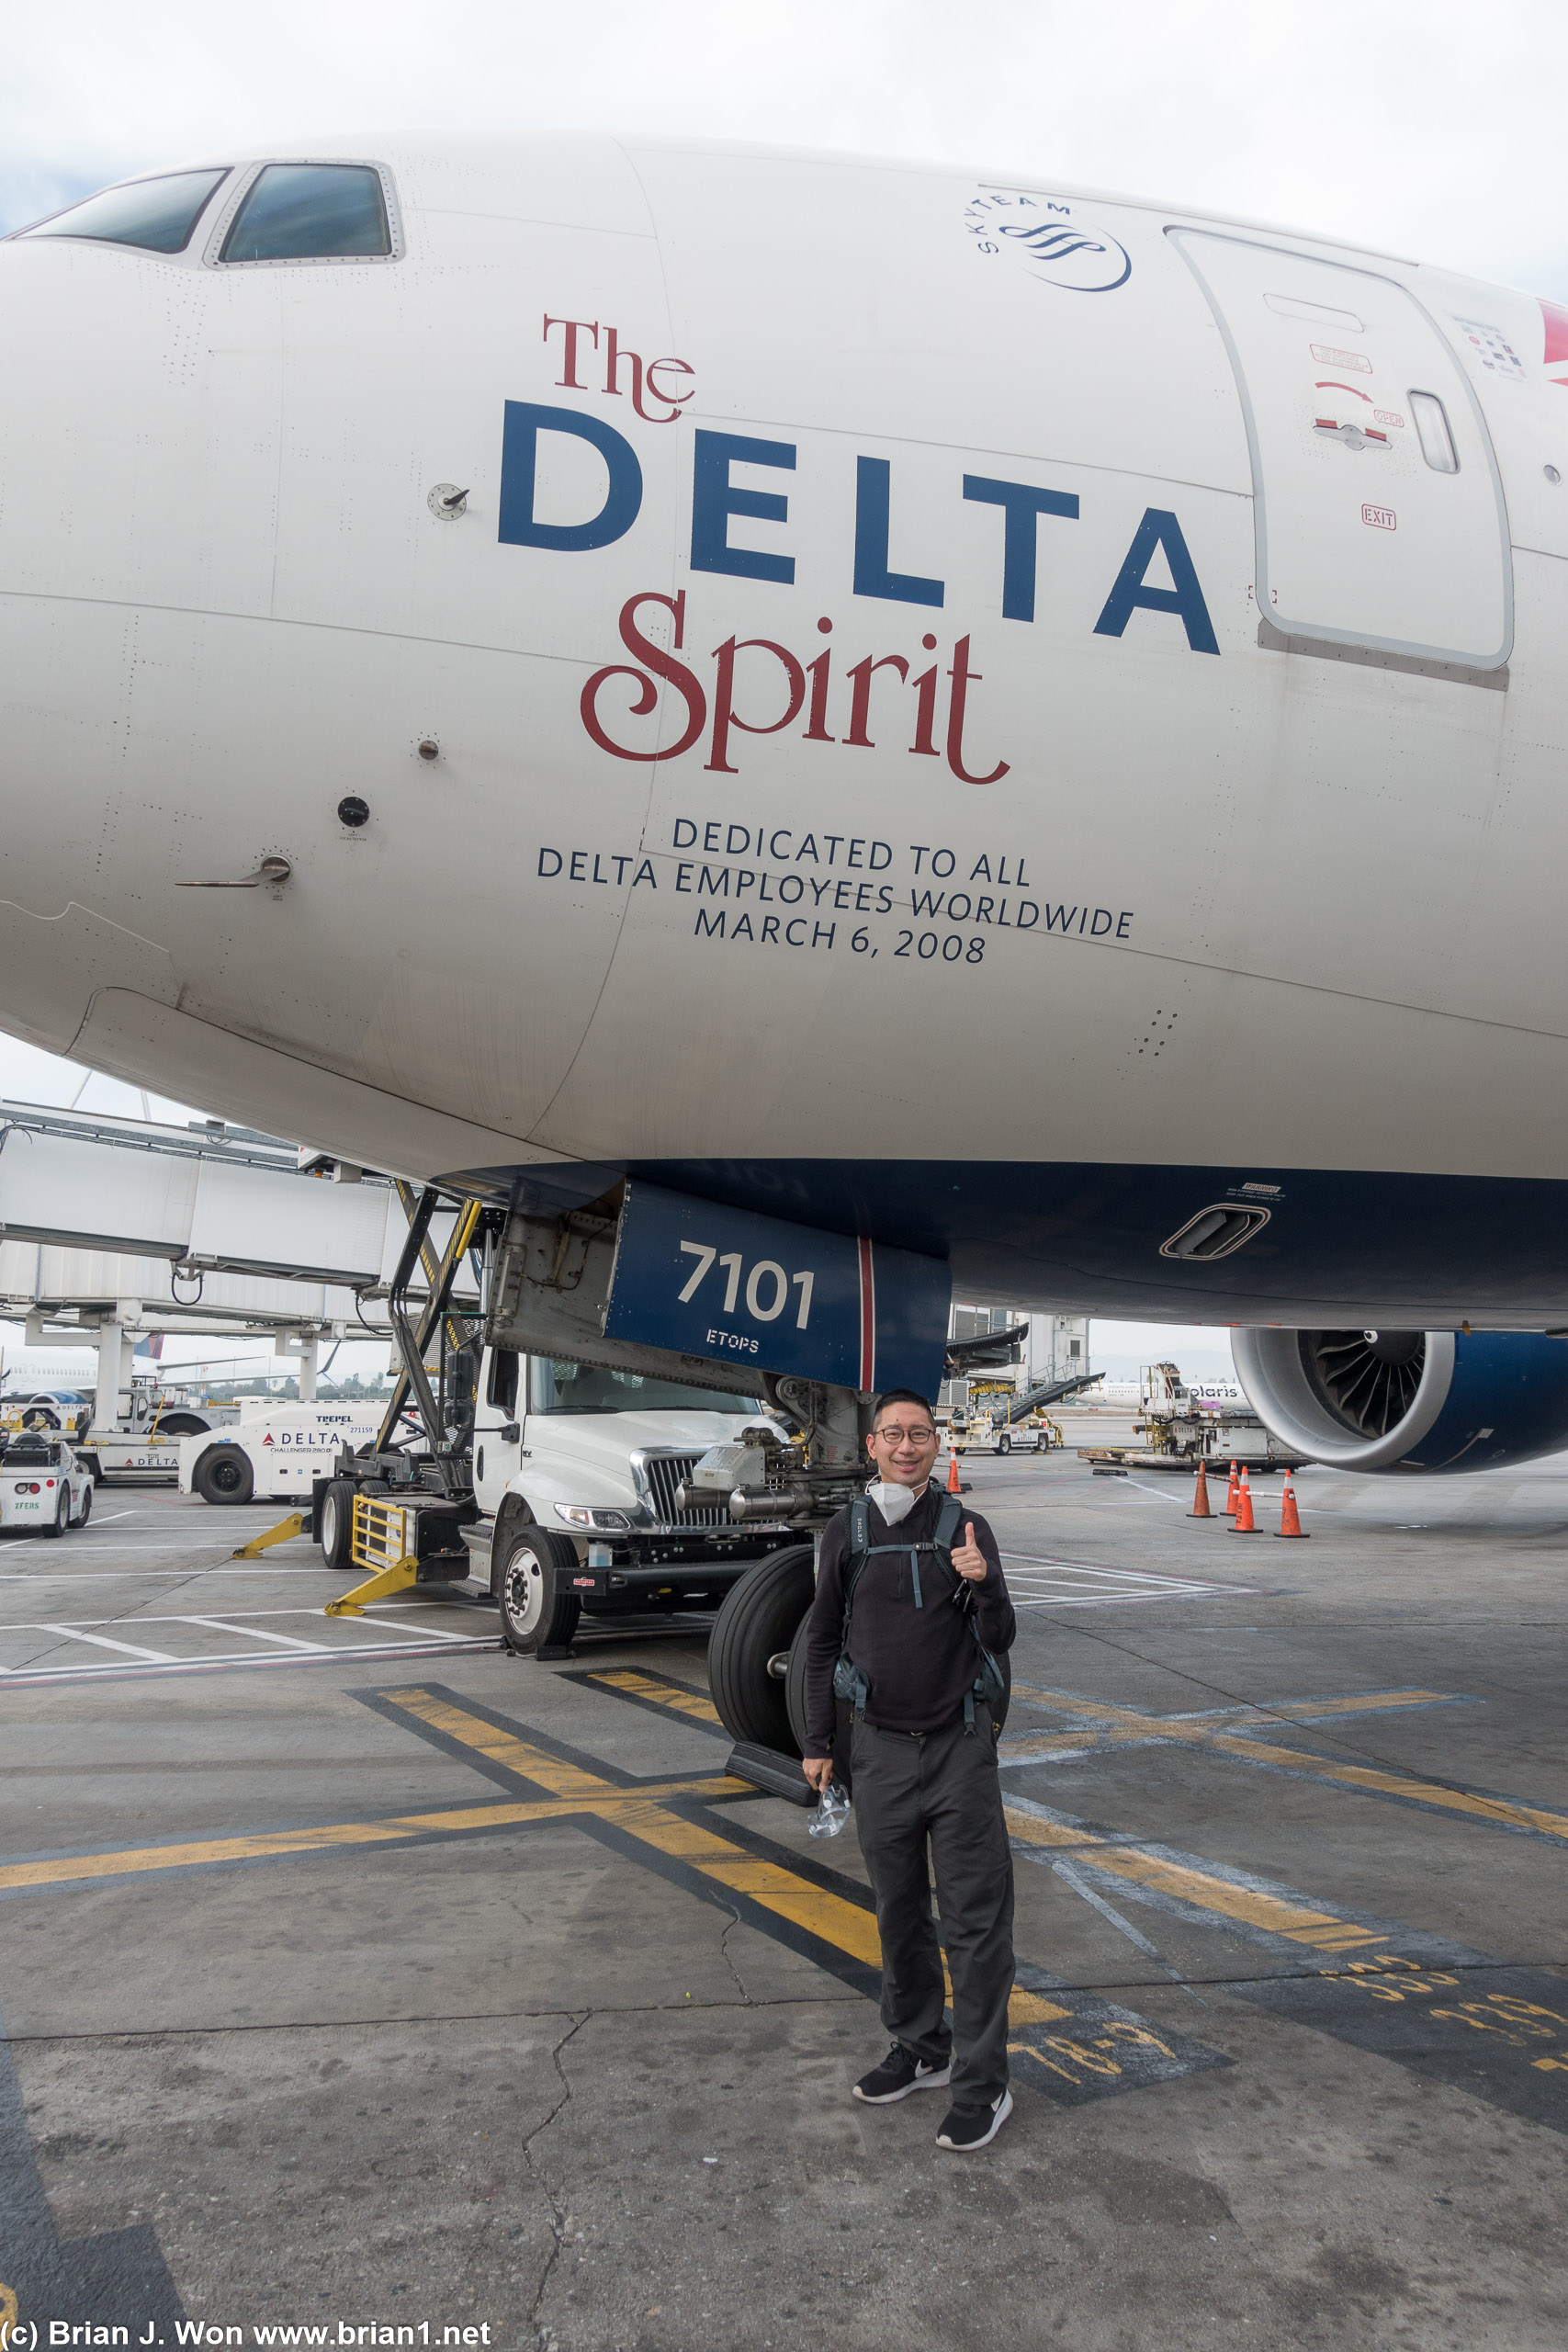 Posing next to The Delta Spirit. Glad I could make it!